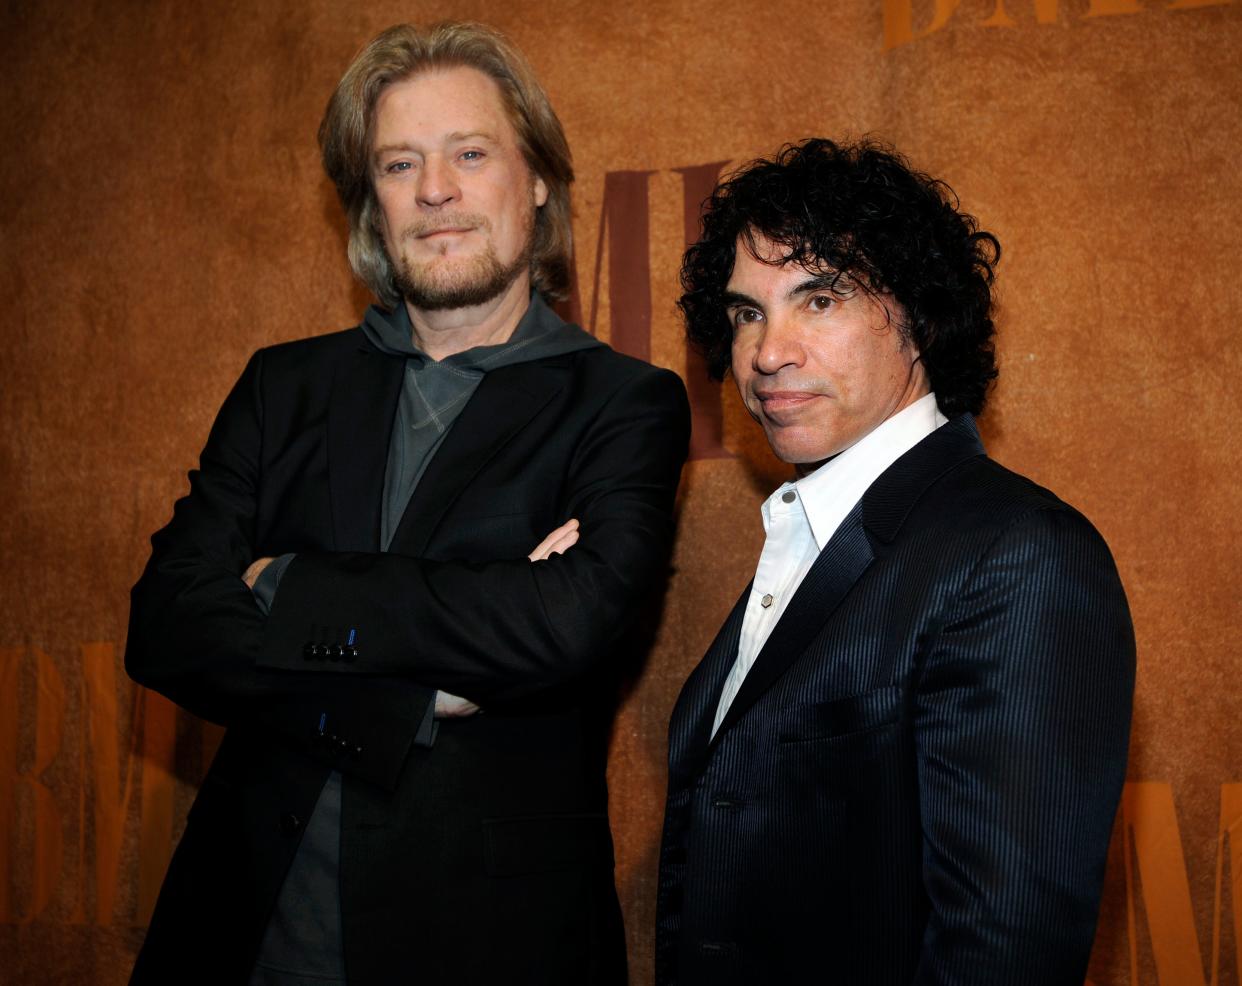 Daryl Hall, left, and John Oates pictured together in Beverly Hills, Calif., in 2008.